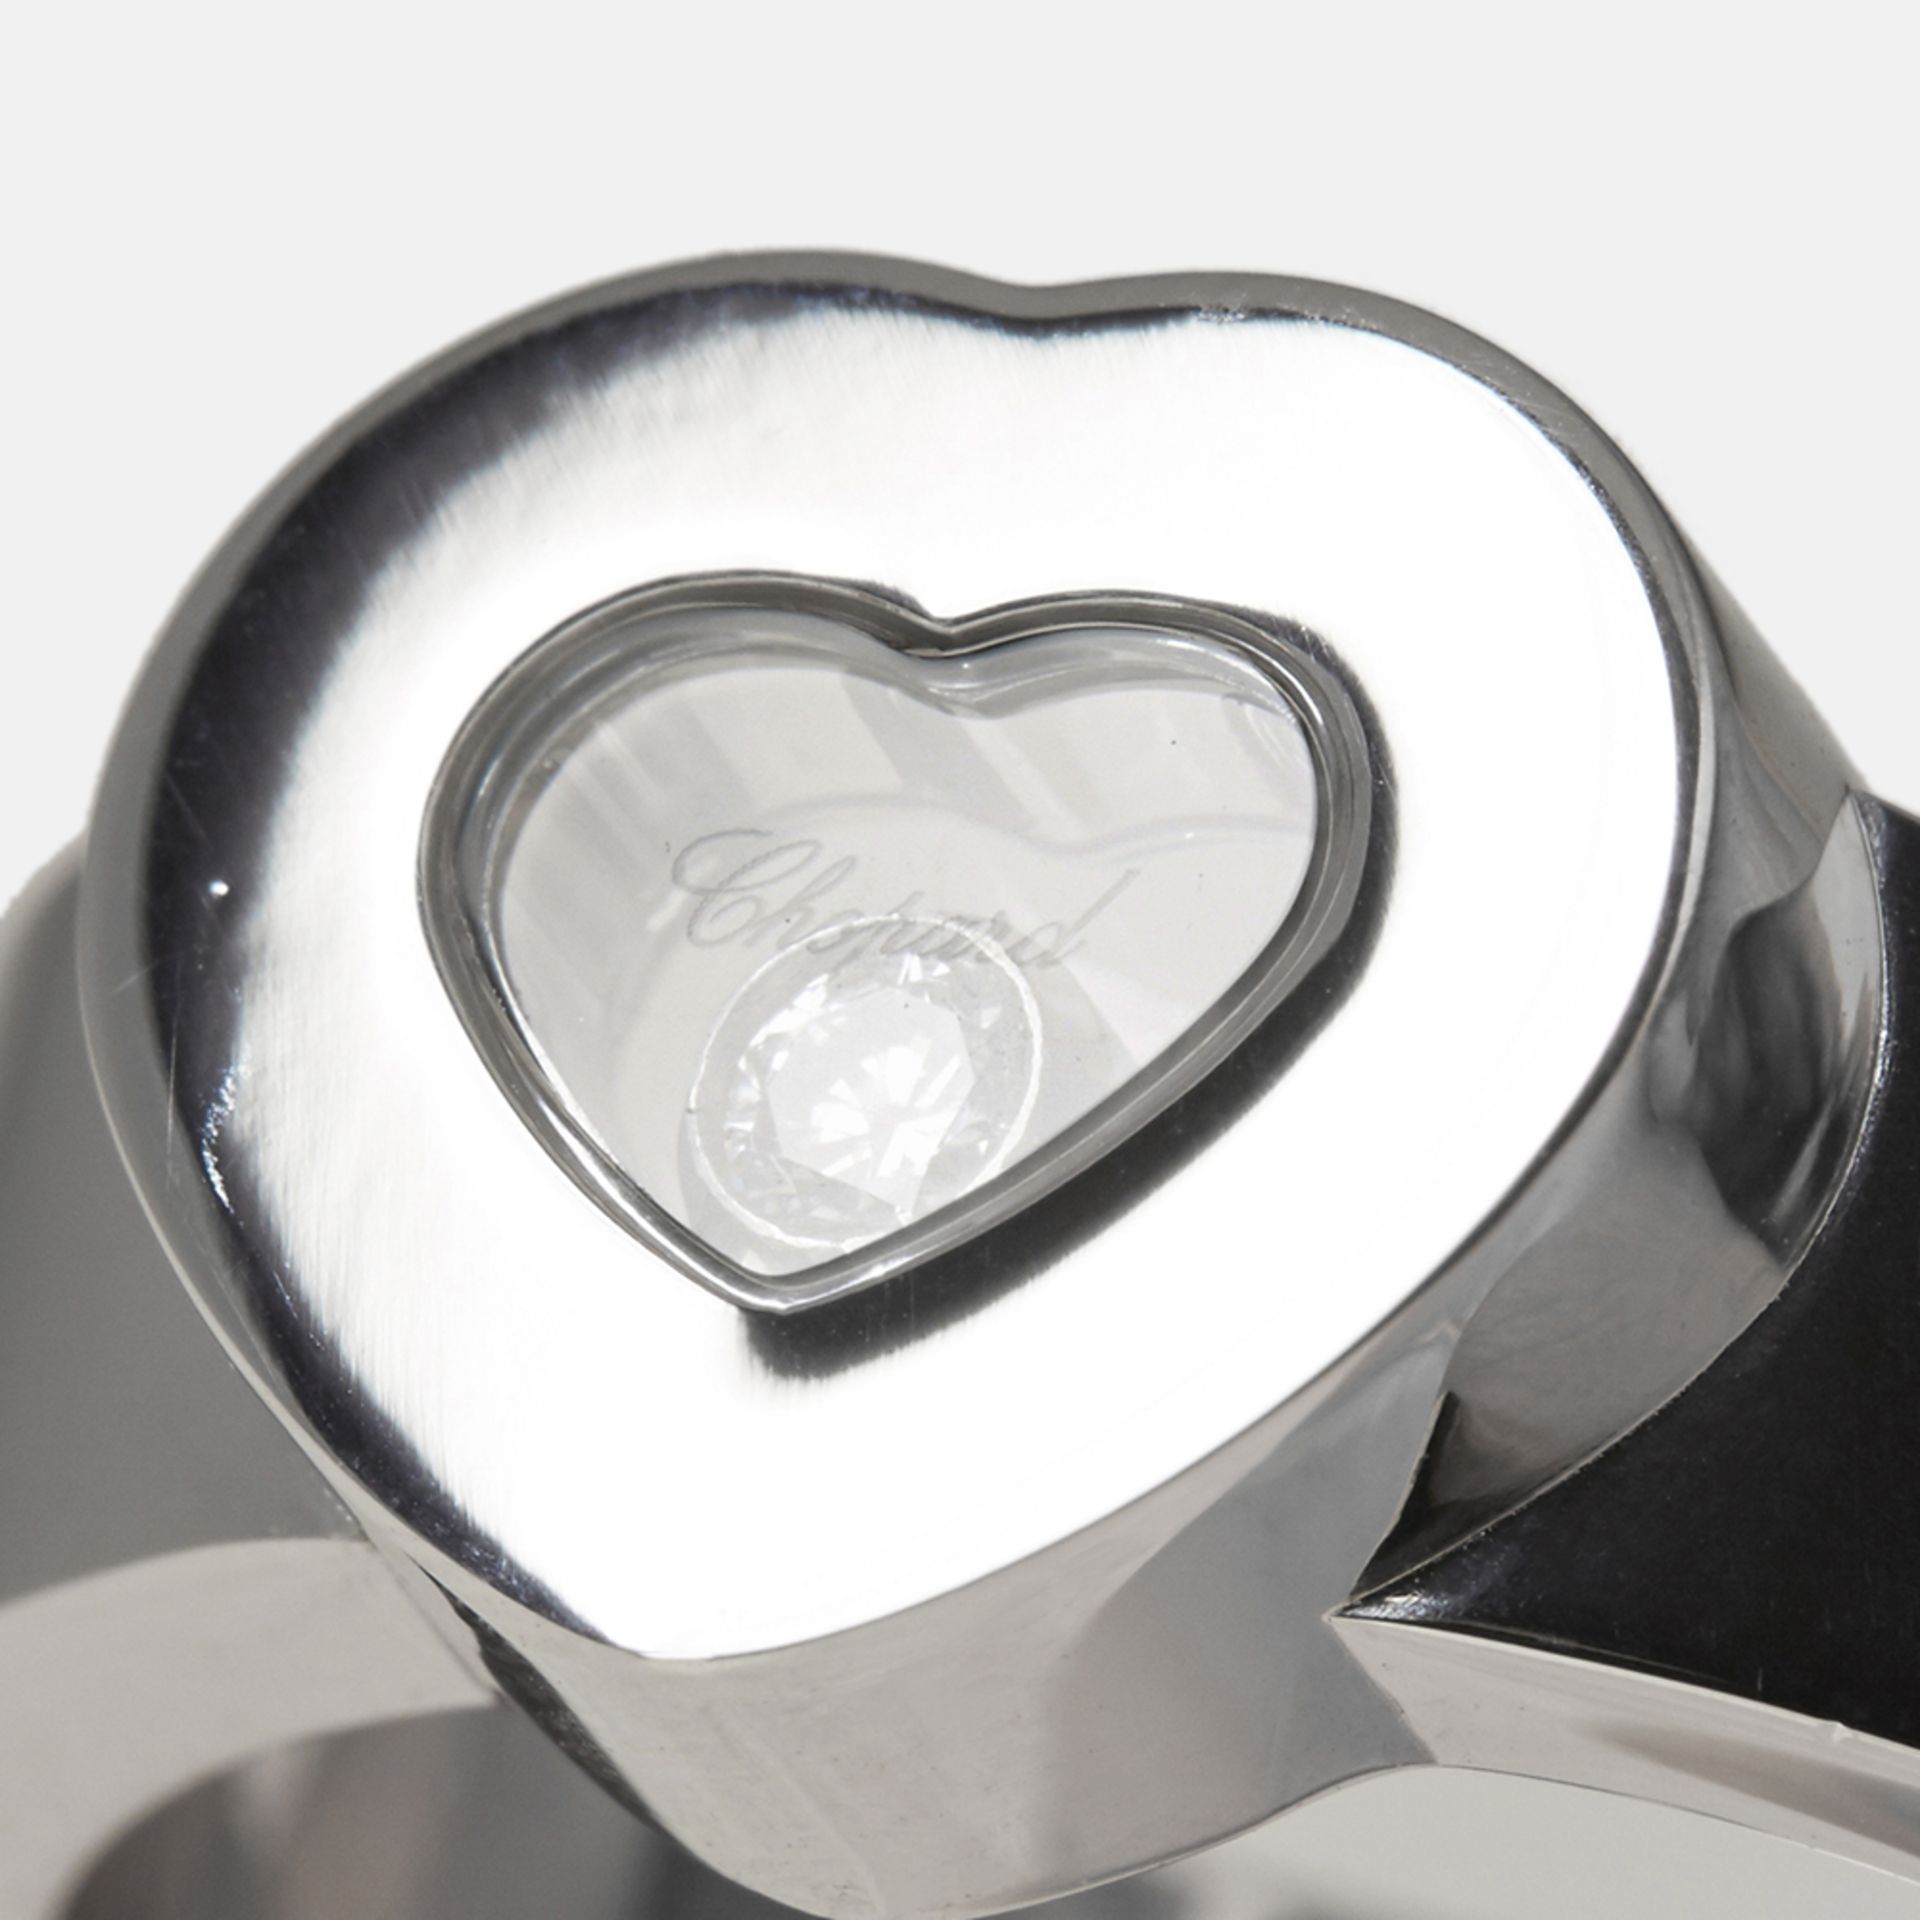 Chopard 18k White Gold Heart Happy Diamonds Ring - Image 5 of 5